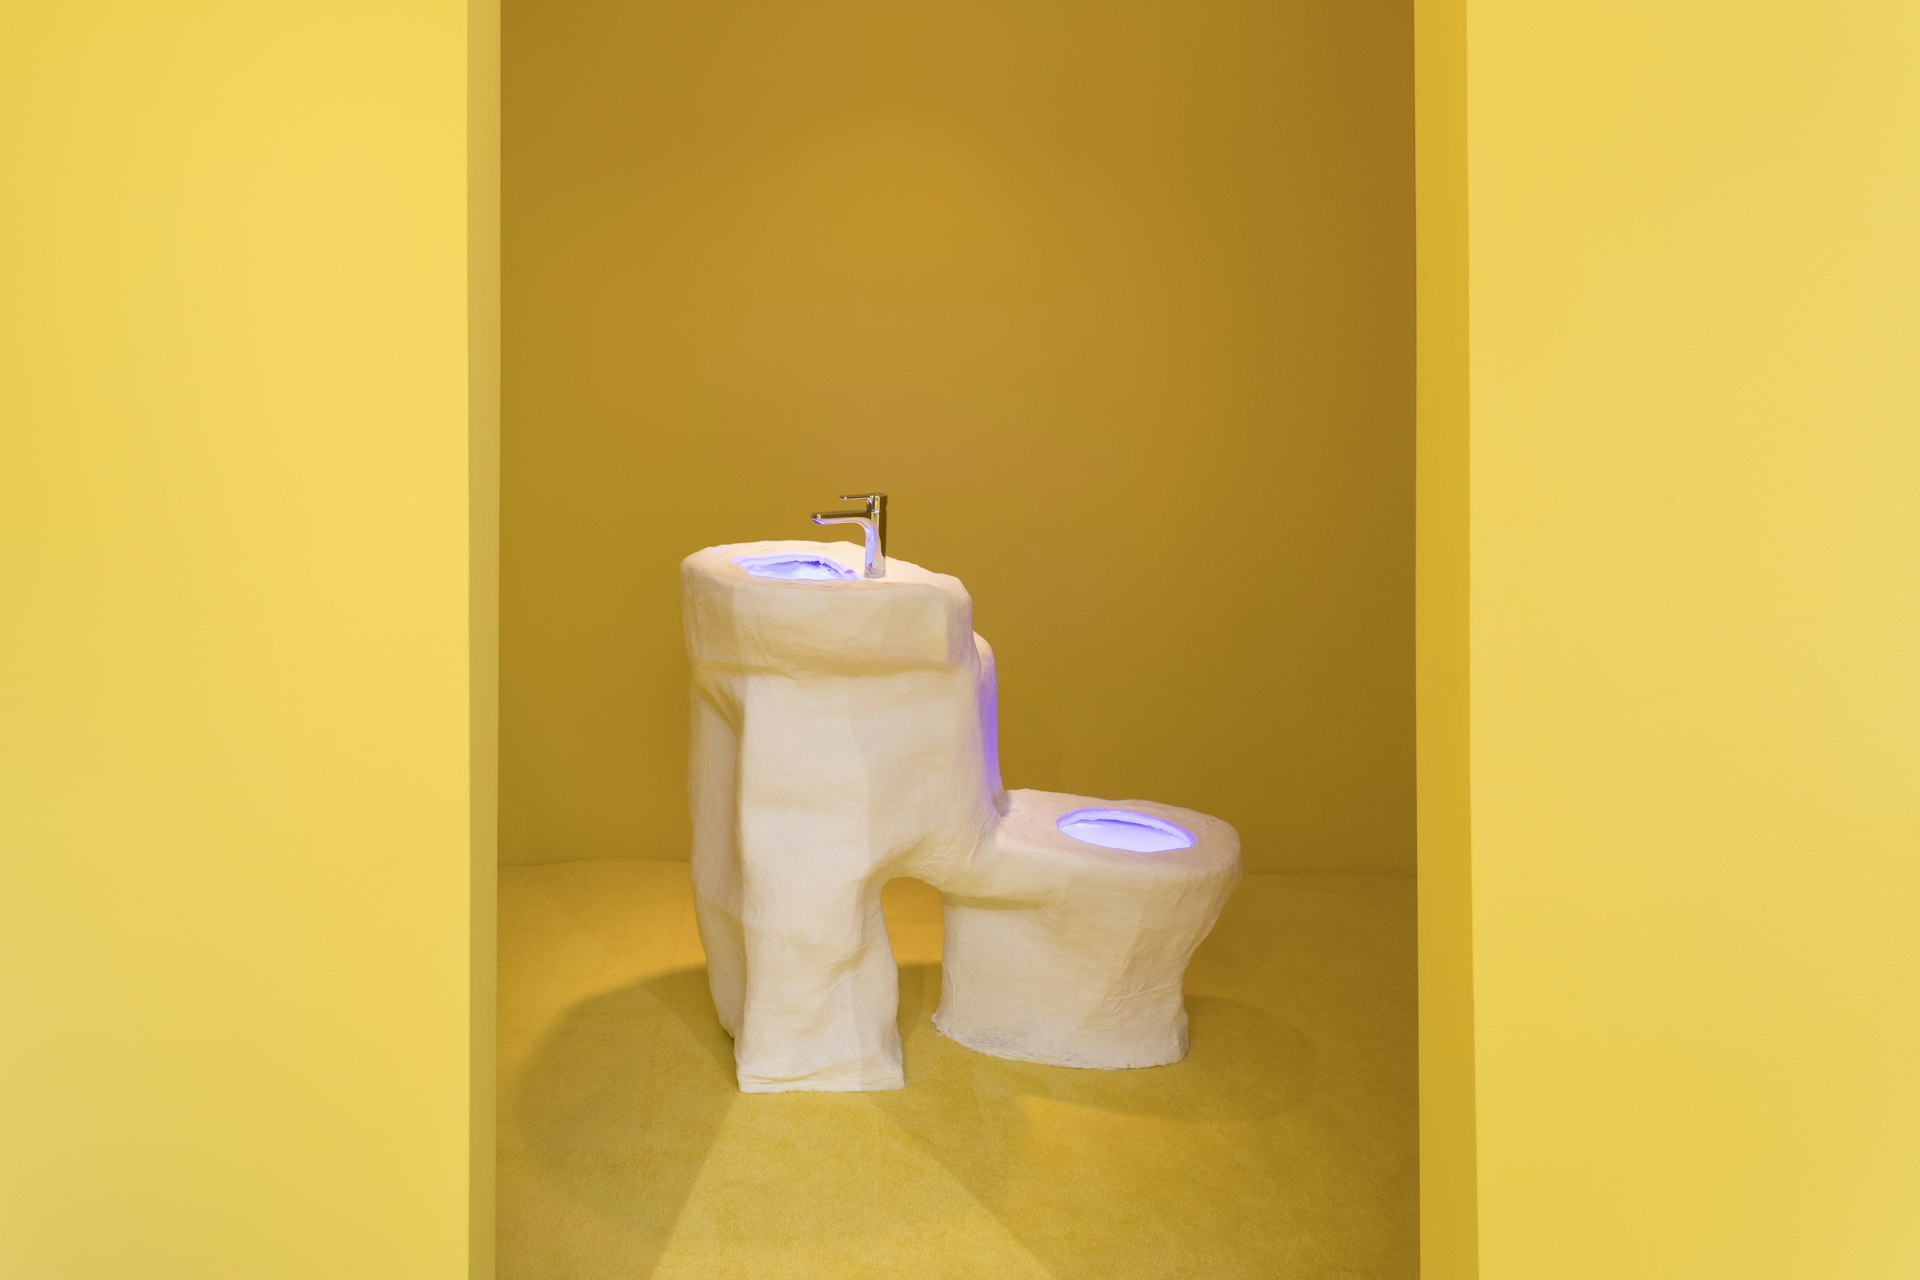 A picture of a designer toilet inside the exhibition